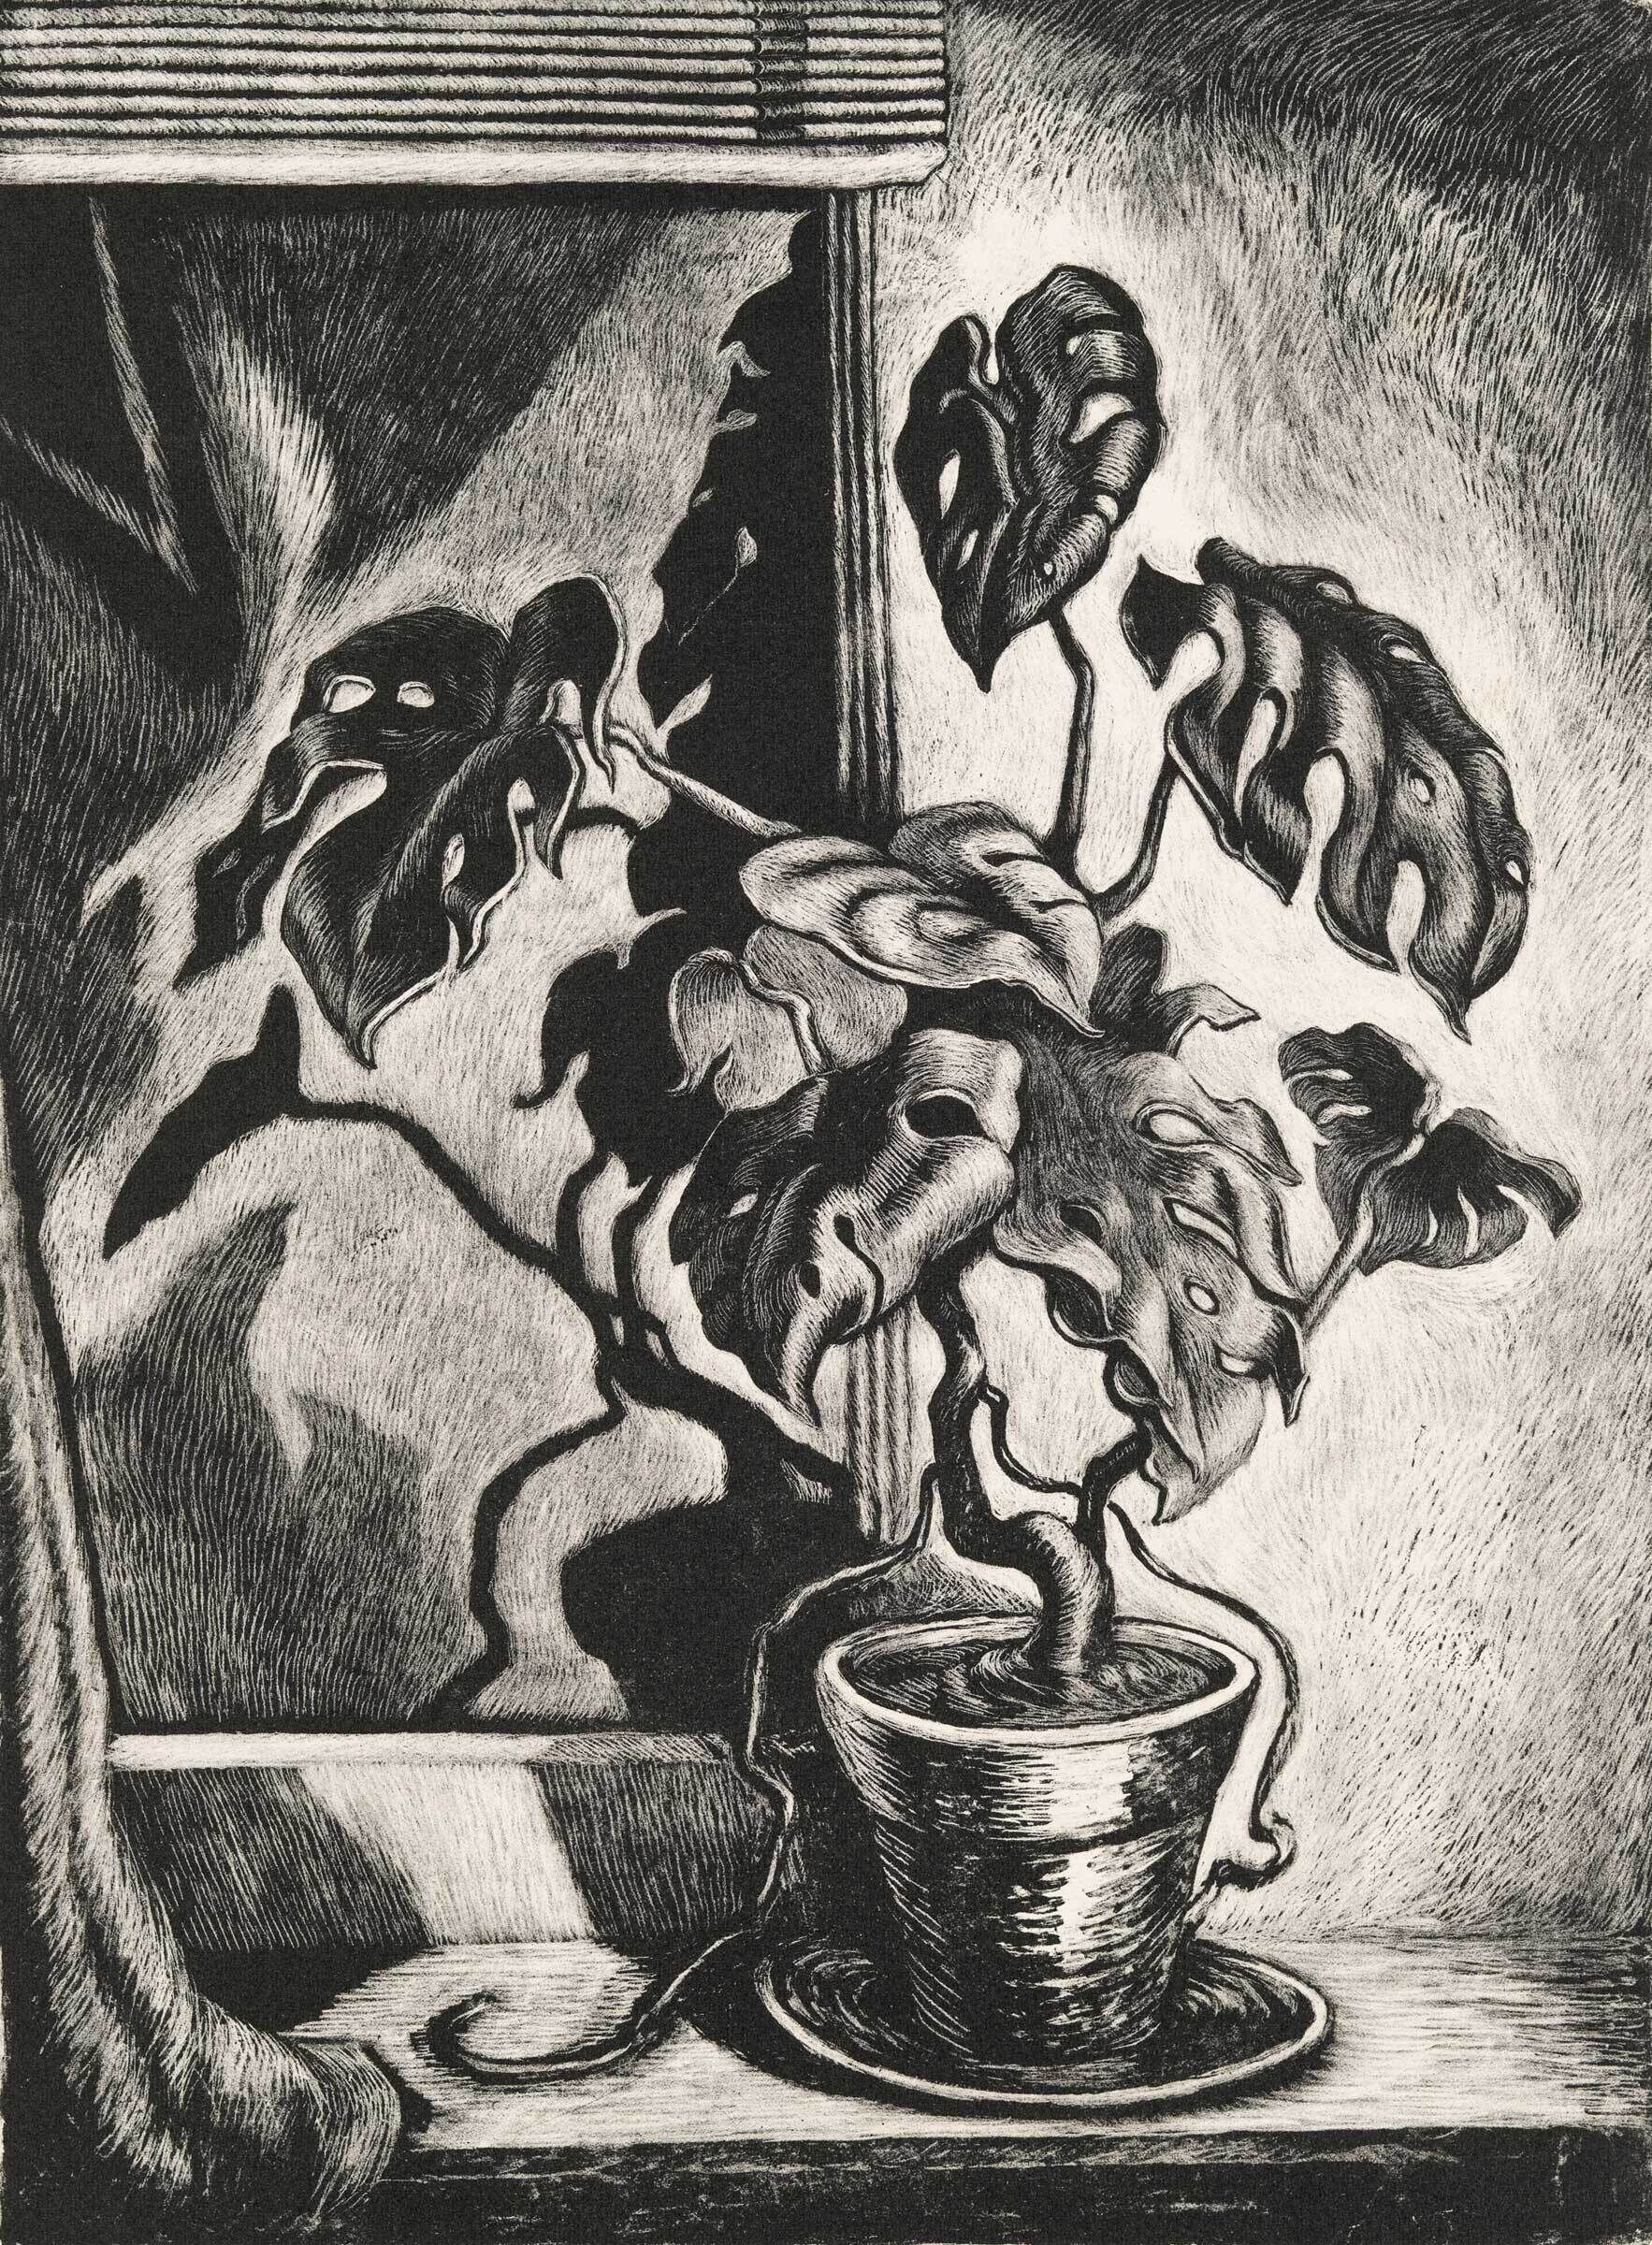 Black and white etching of a potted plant with large, twisted leaves by a window, casting dramatic shadows.